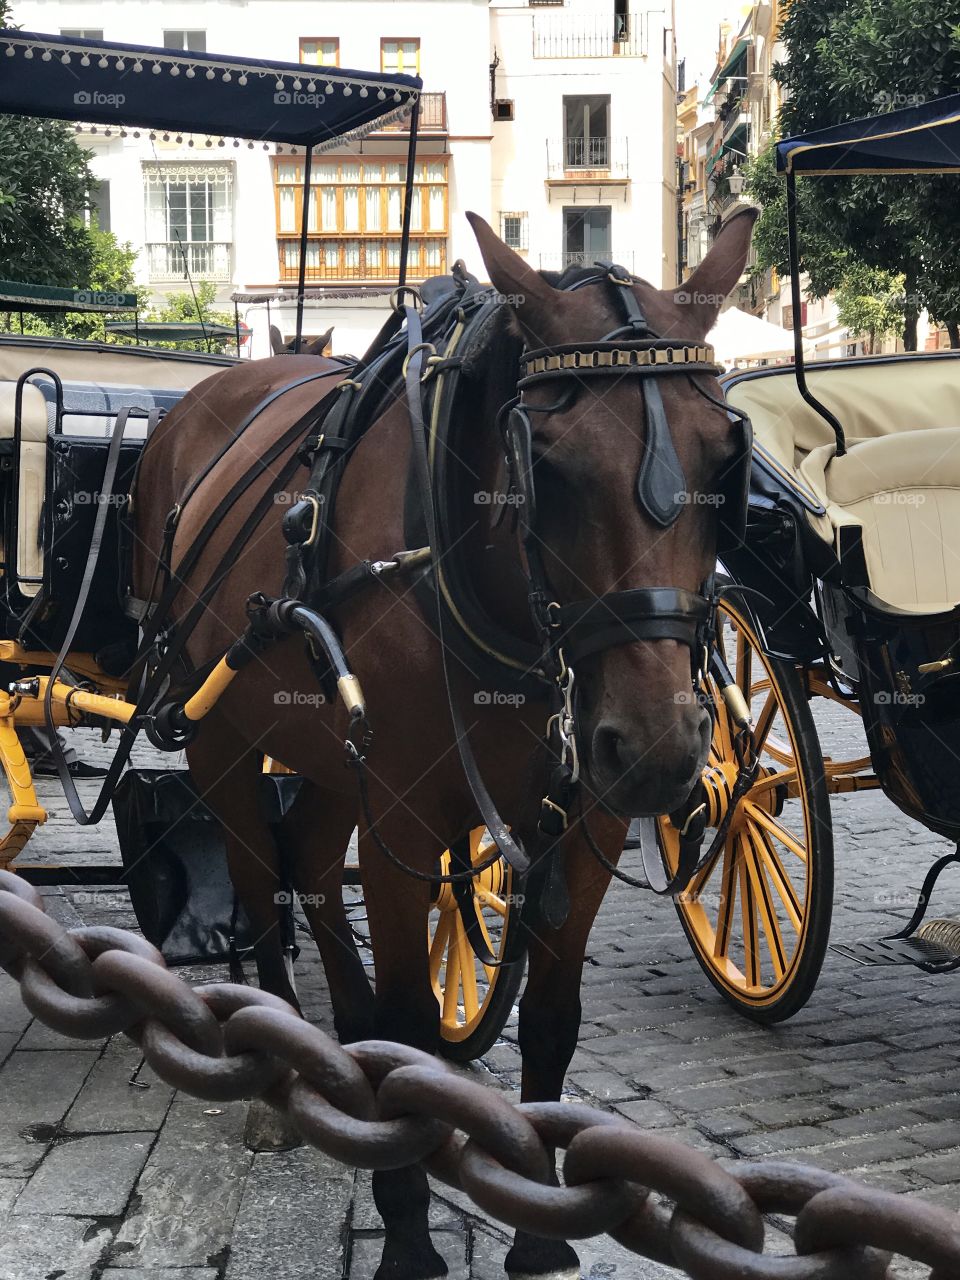 Horse and cart in Seville, tradition runs strong in Spain